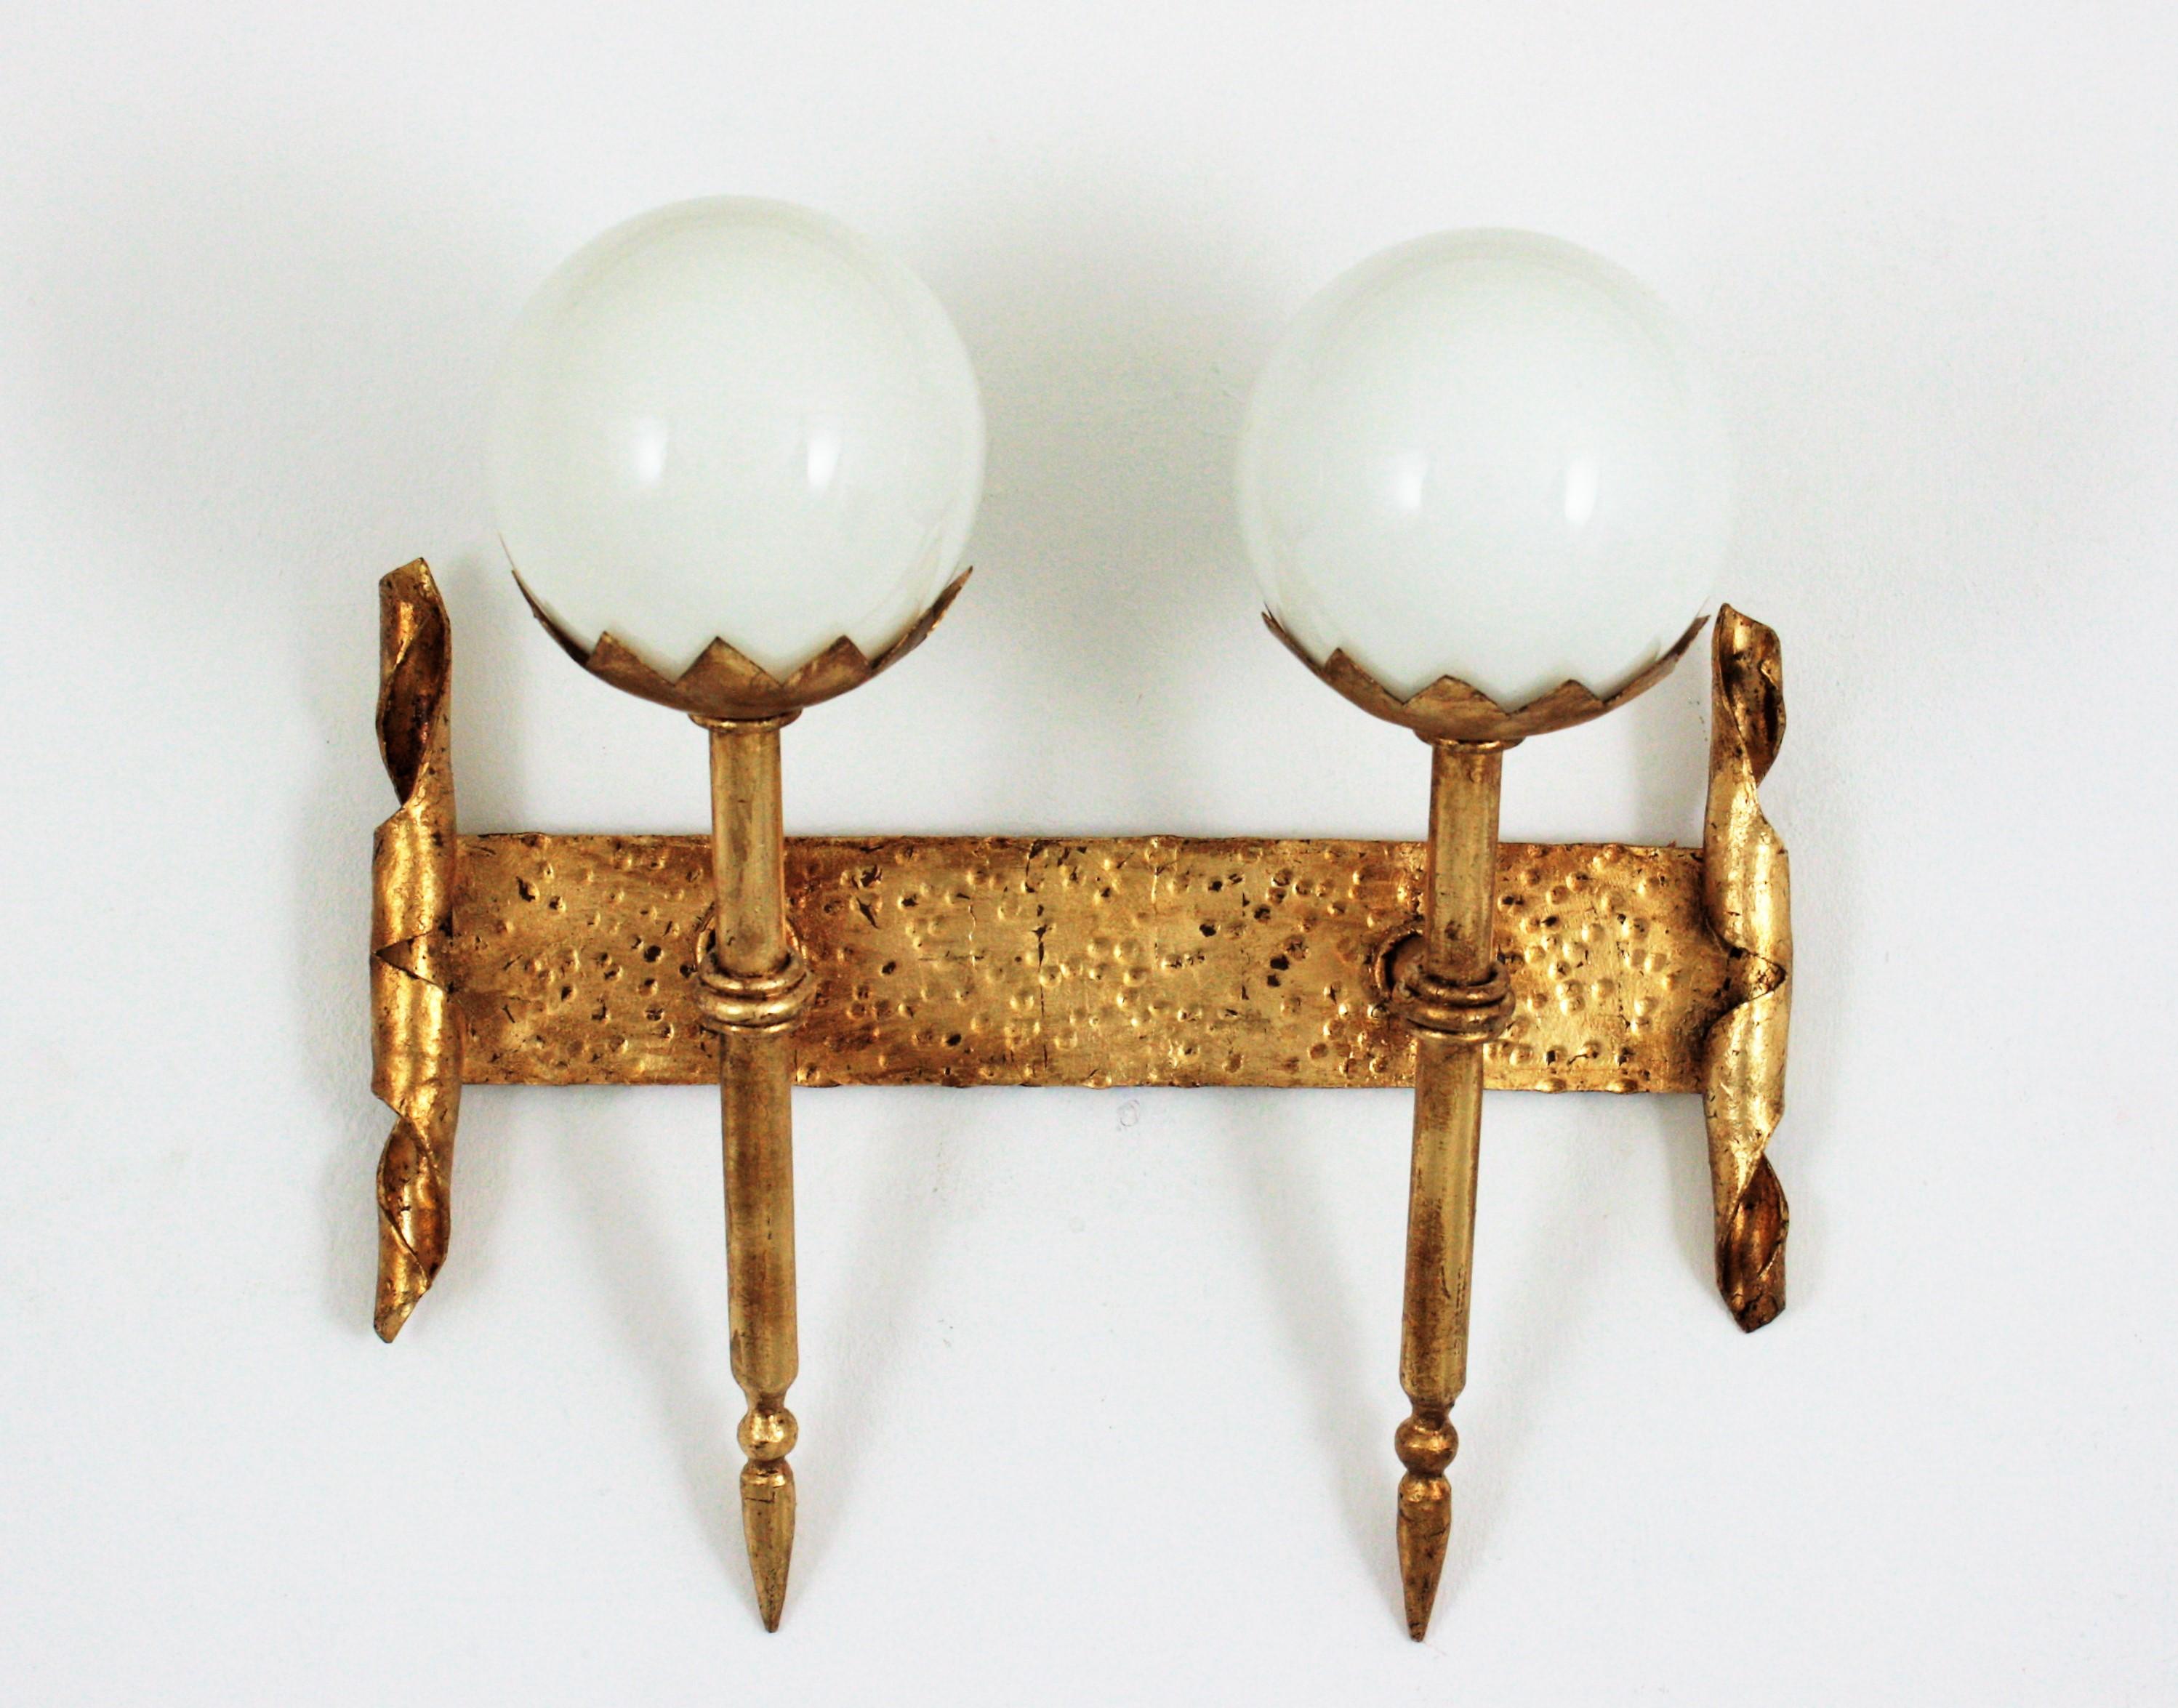 French Gothic Revival Double Torch Wall Sconce in Wrought Iron with Milk Glass Globes For Sale